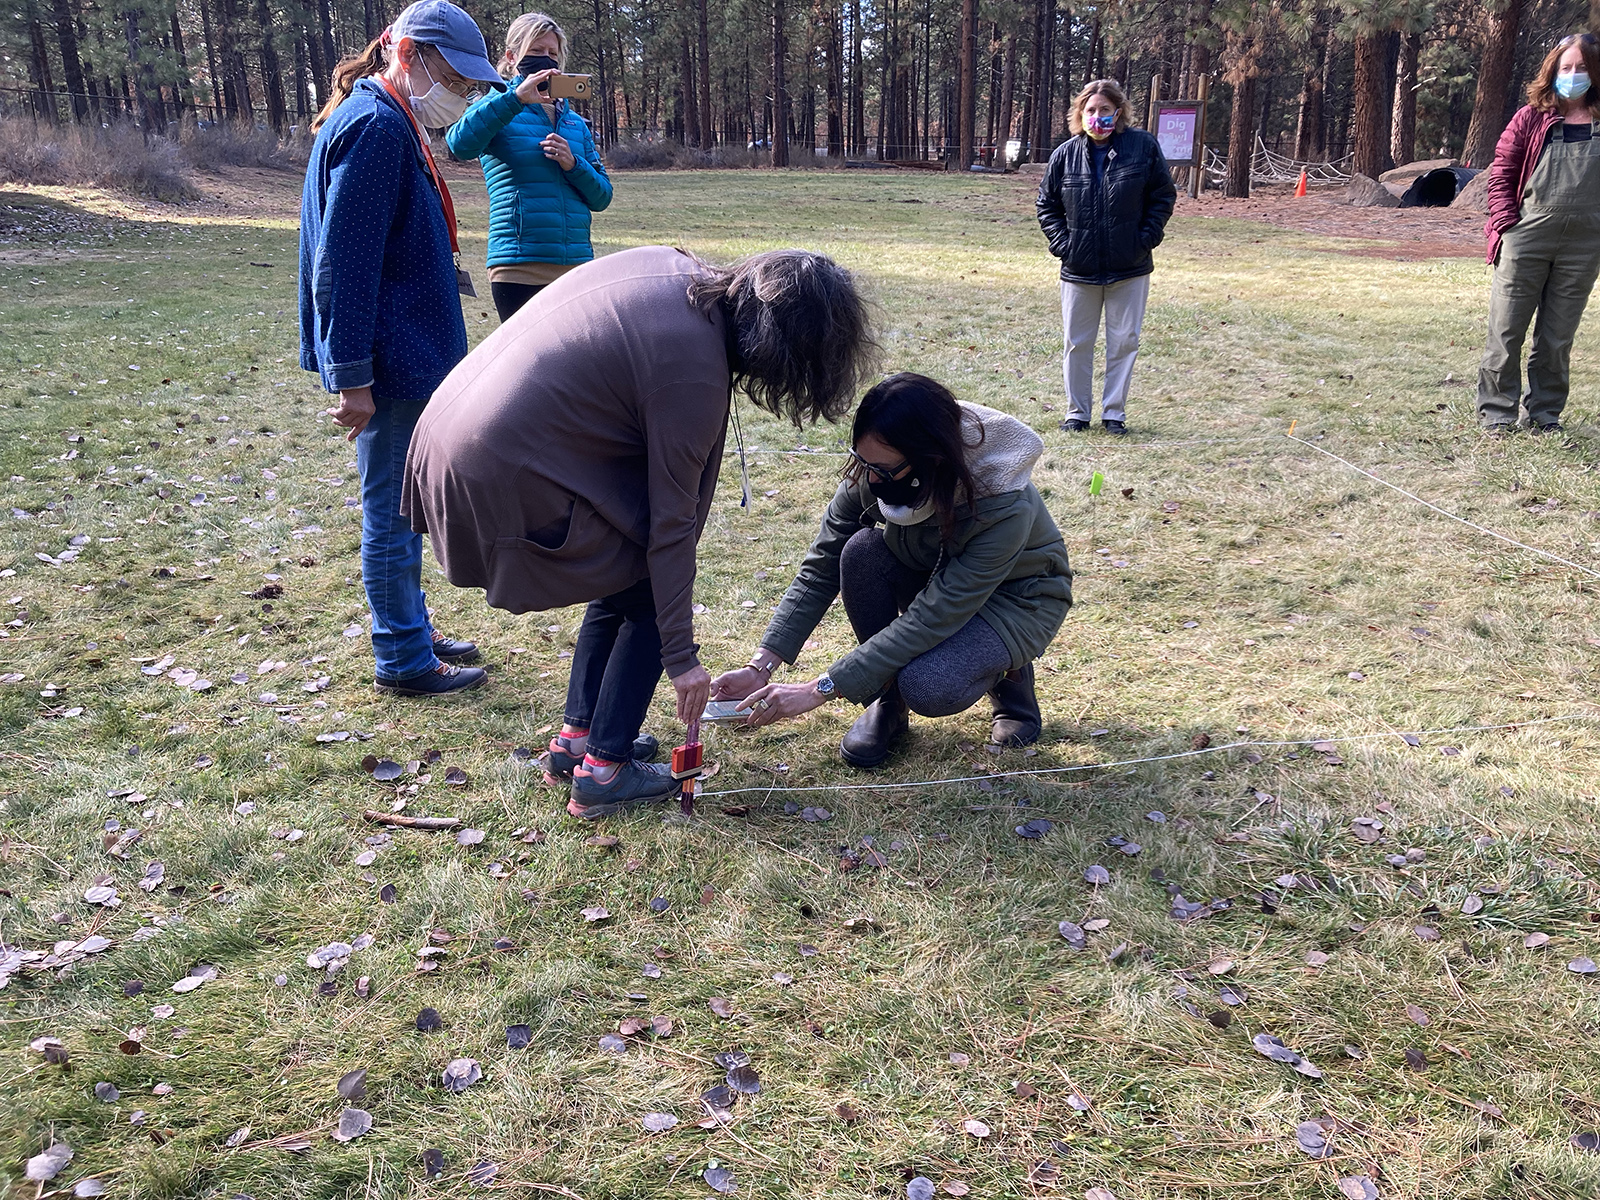 Teachers attach a SensorTag to capture data above the pervious surface.